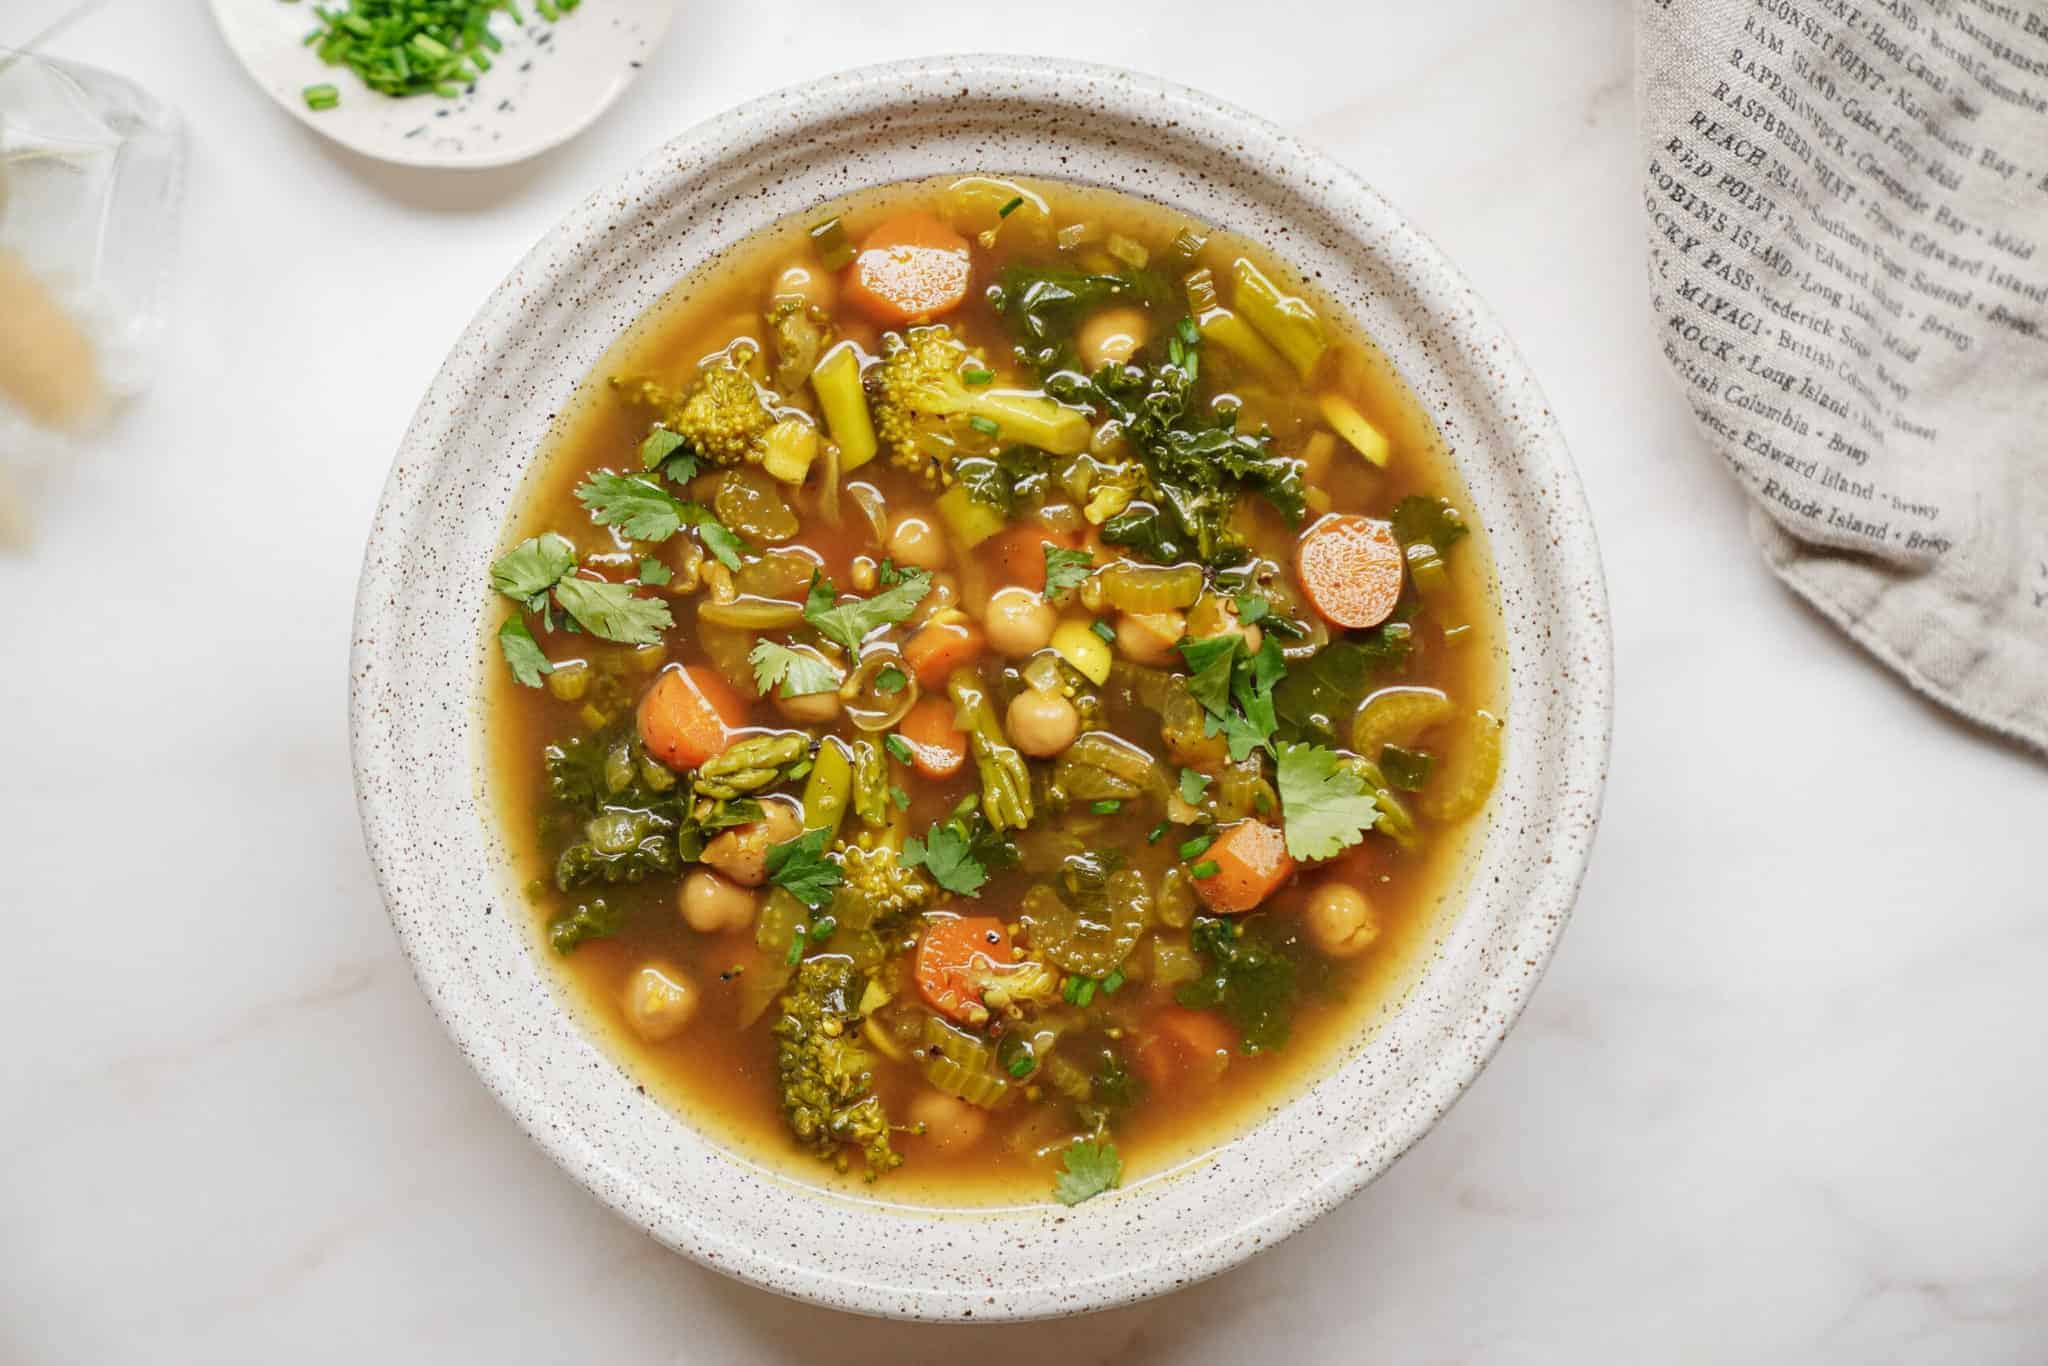 Vegetable Turmeric Detox Soup in a bowl on the table